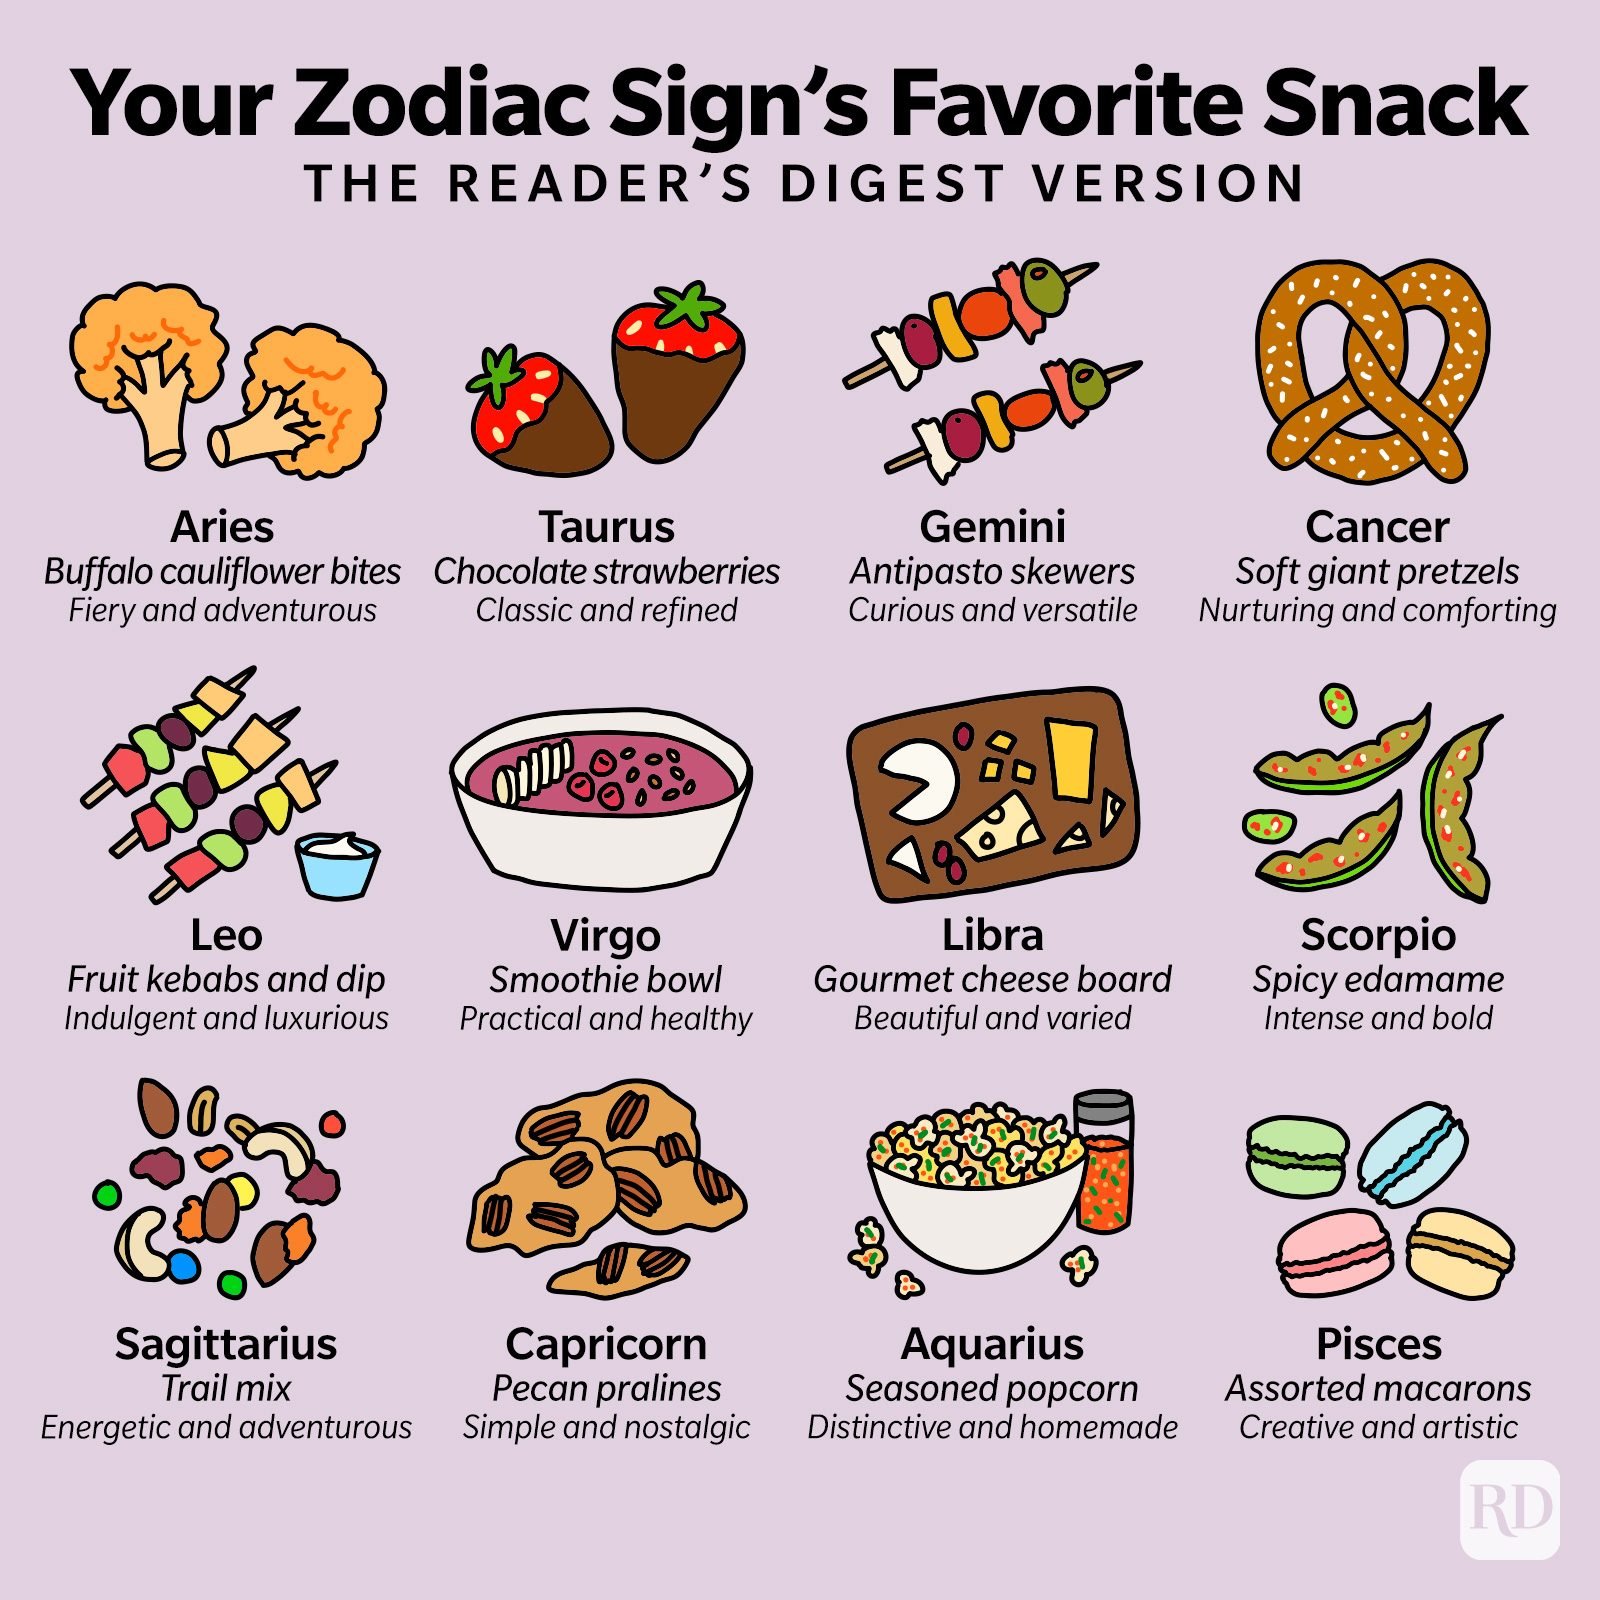 https://www.rd.com/wp-content/uploads/2023/06/Your-Favorite-Snack-According-to-Your-Zodiac-Sign-Infographic-v2.jpg